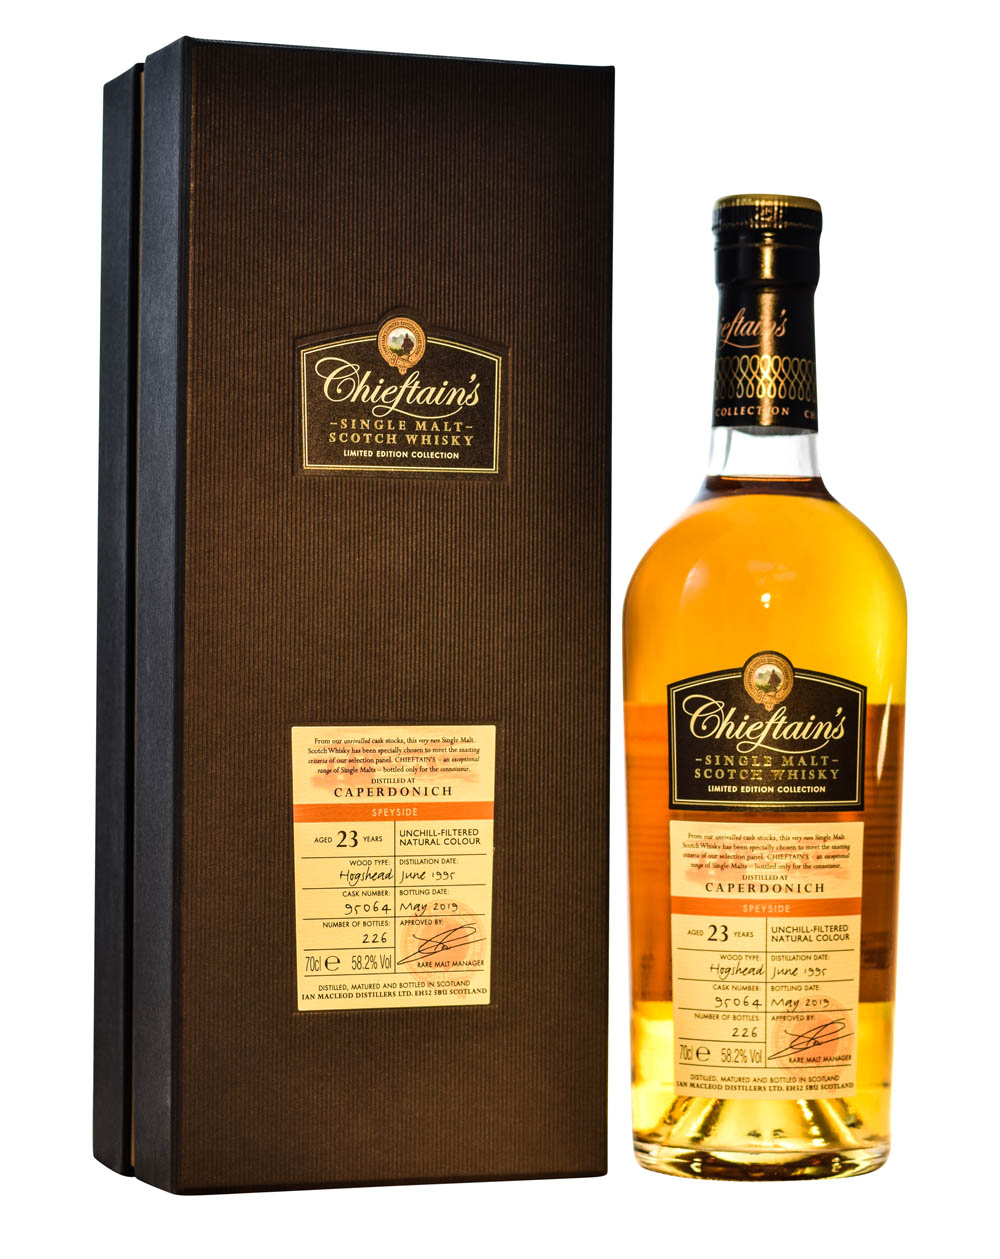 Caperdonich 1995 Chieftain's (23 Years Old) - Box Musthave Malts MHM